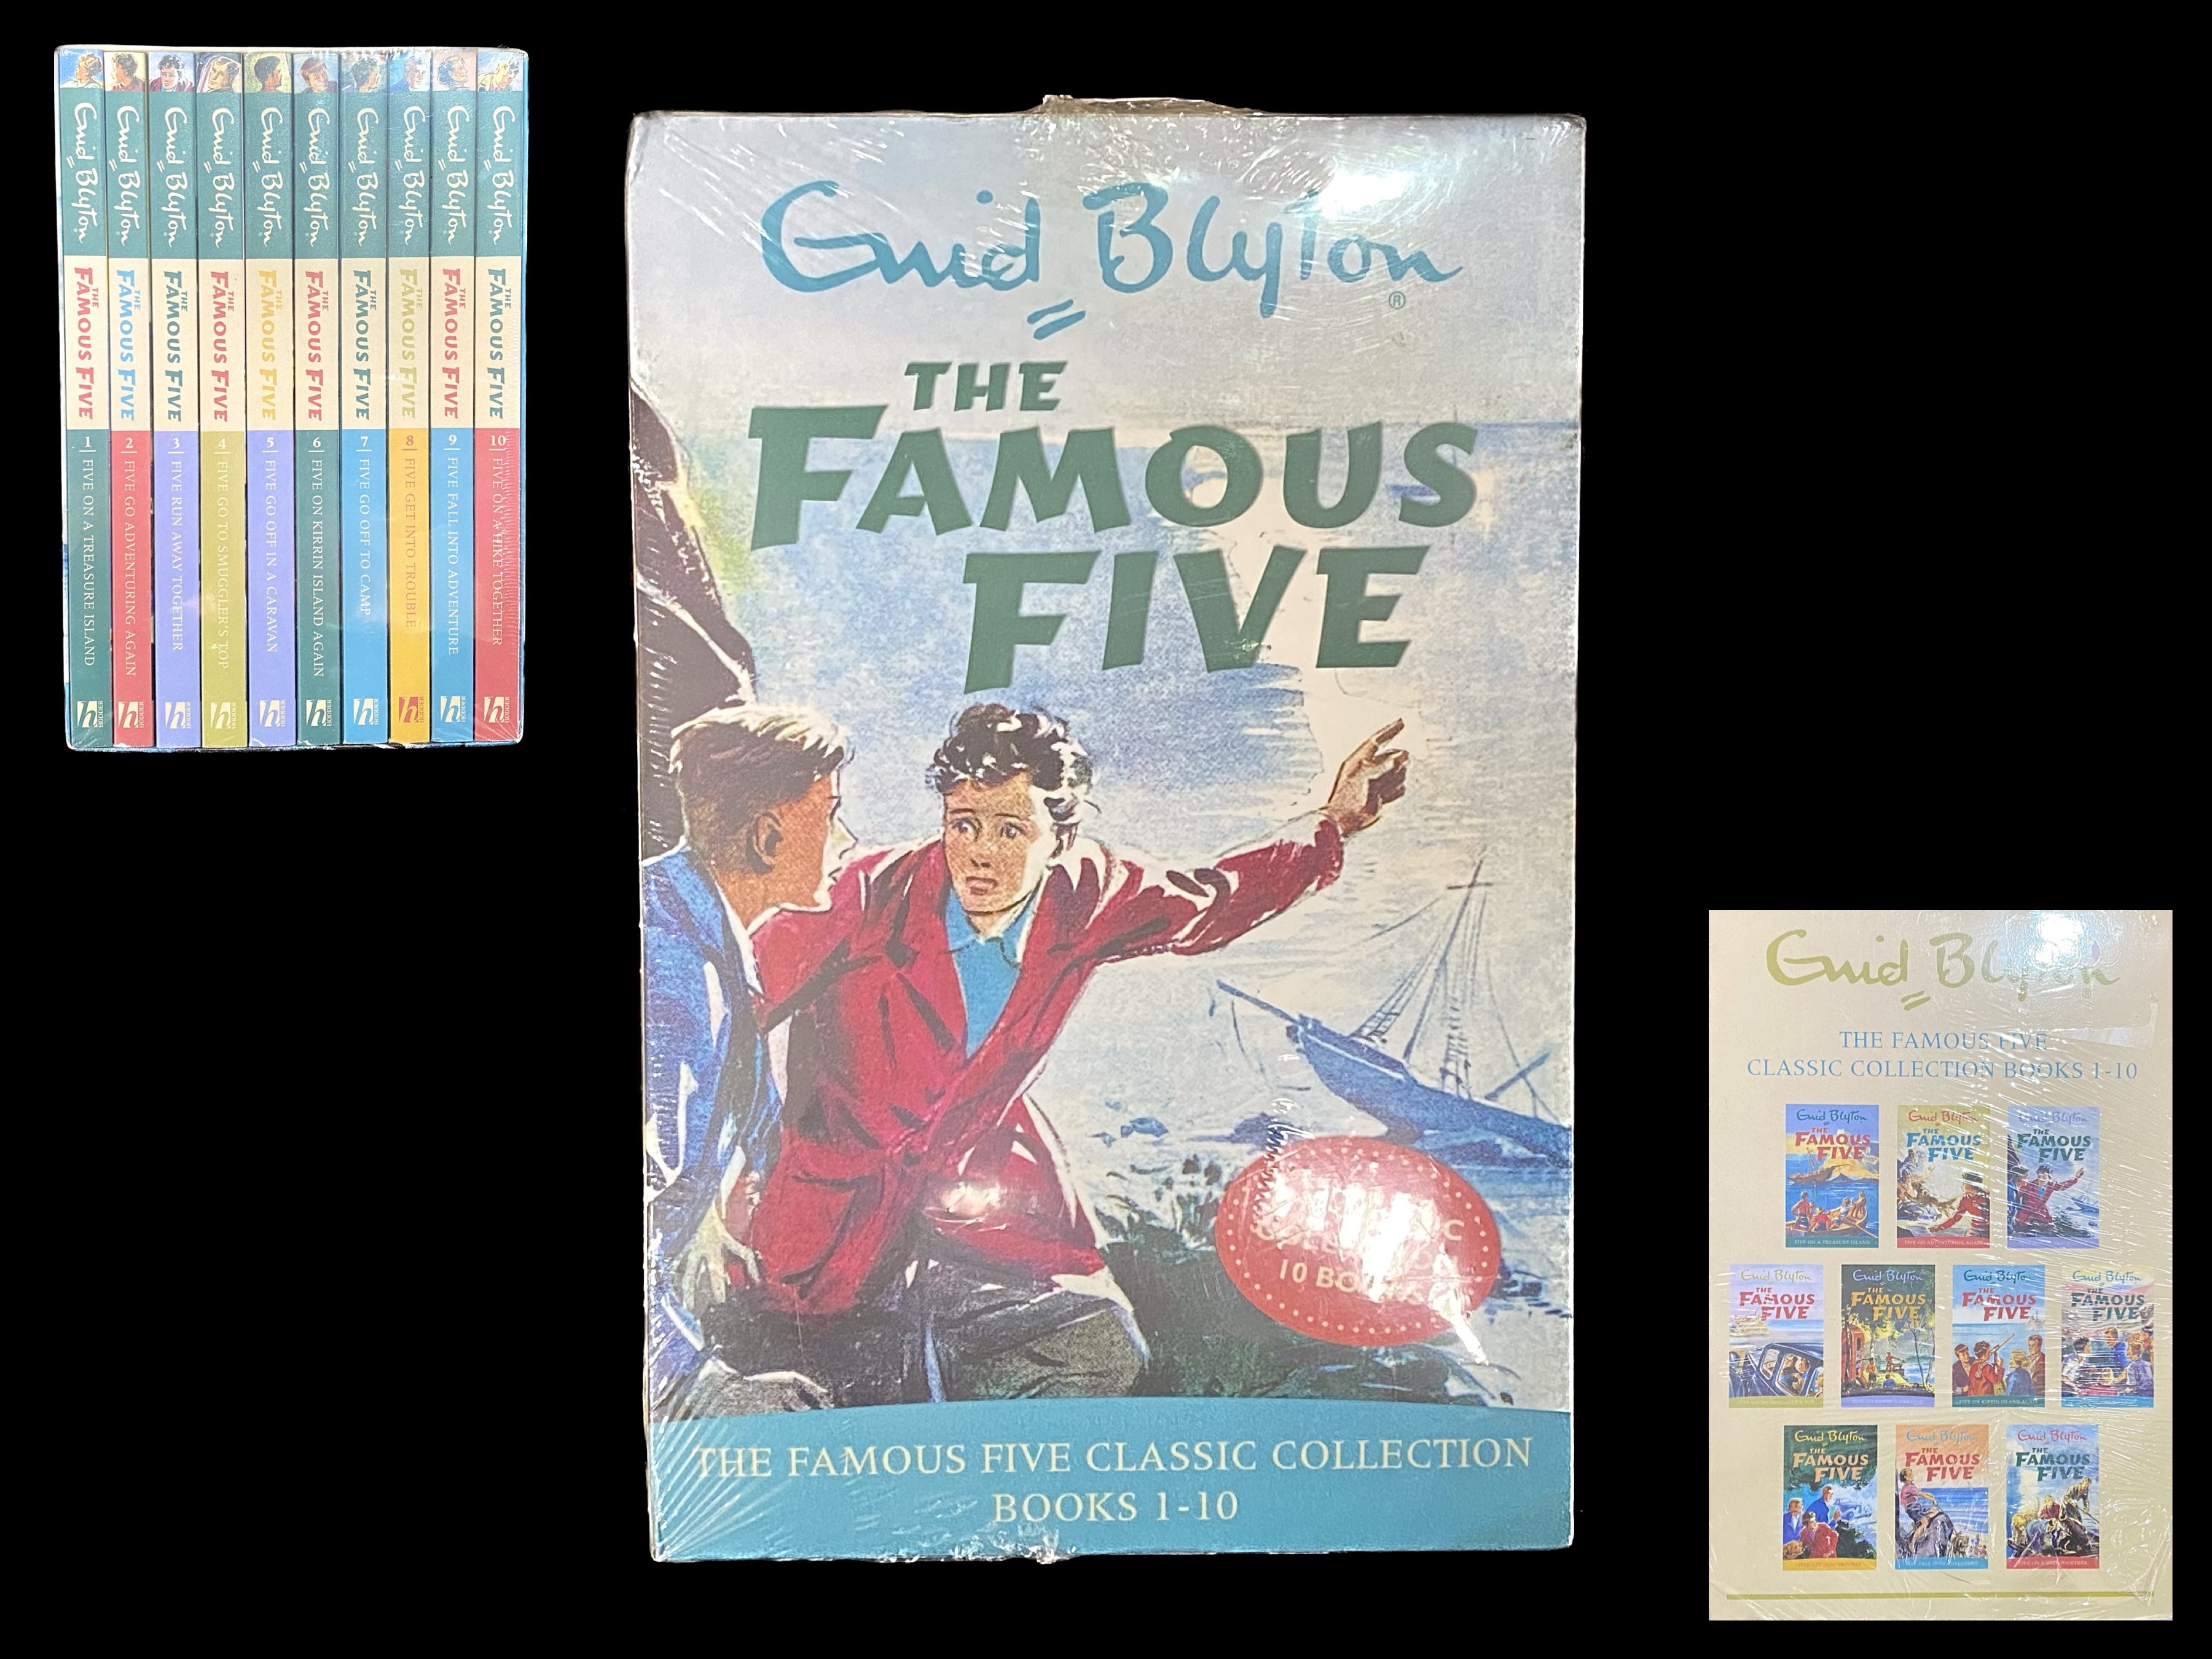 Boxed Set of Enid Blyton 'The Famous Five', ten volumes in total, in sealed box, unused.